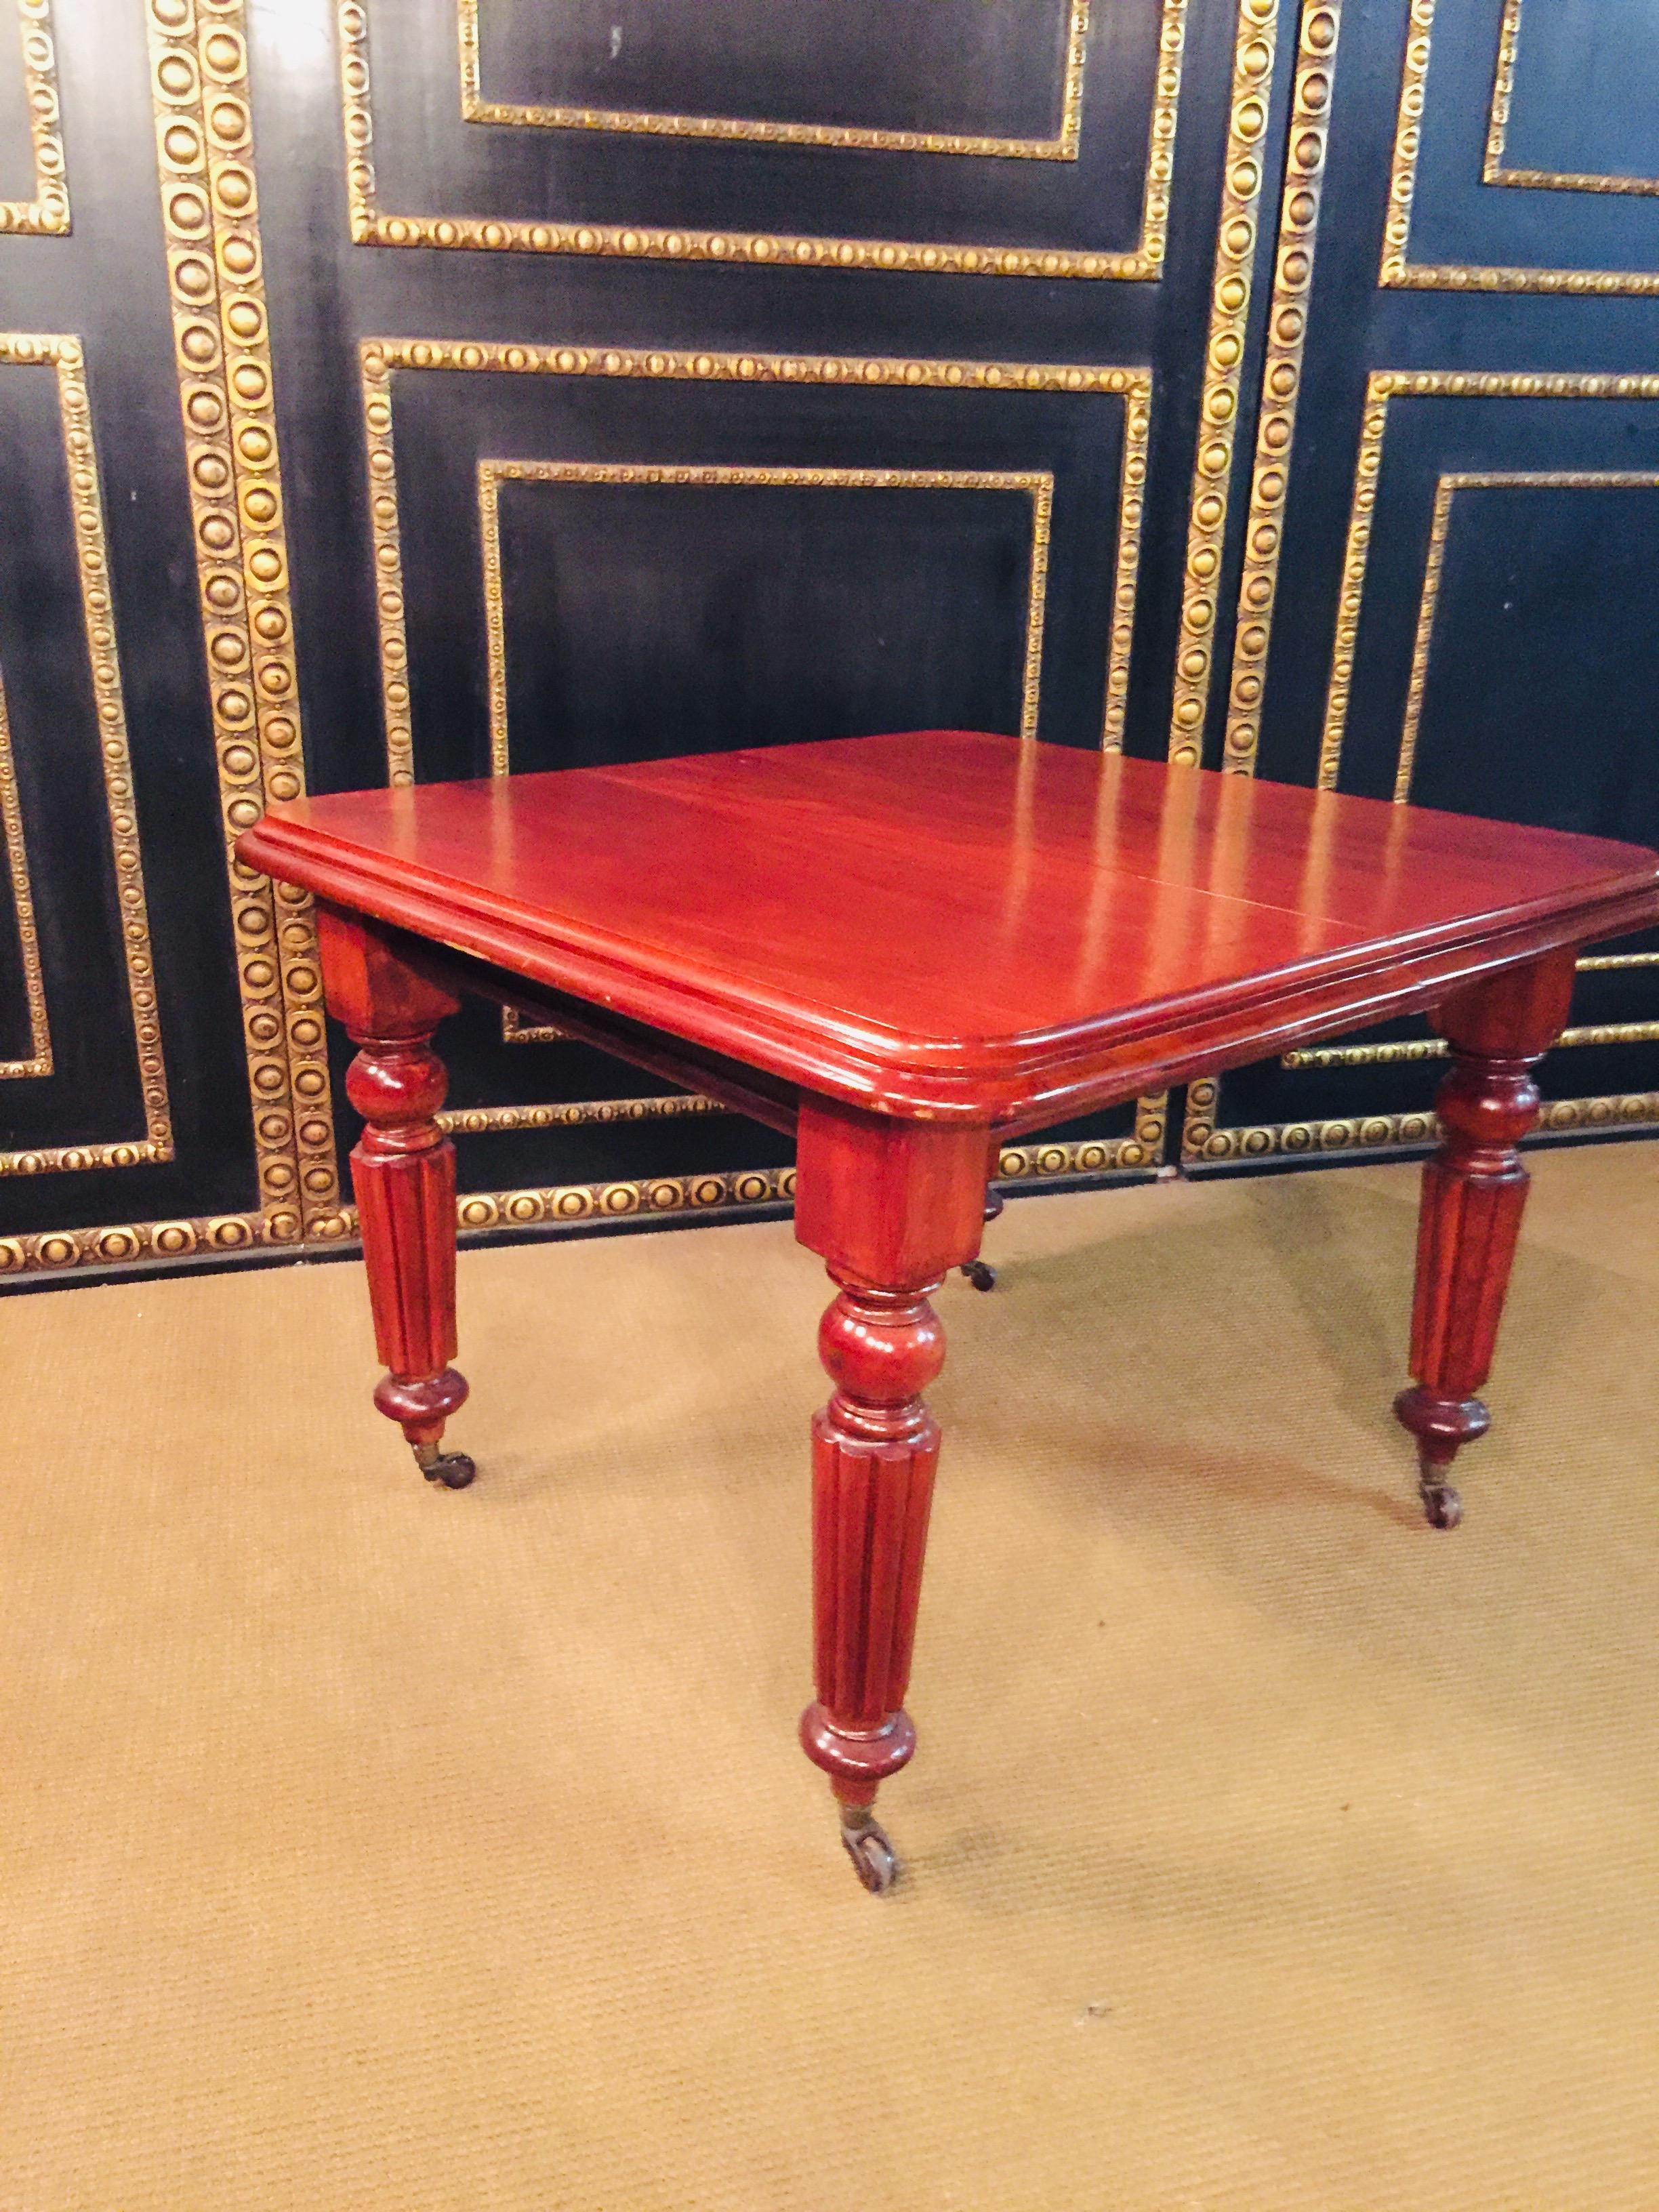 Antique, top quality, solid mahogany English table. Signed Joseph Fitter Tania works cheat Birmingham circa 1850 original casters. Joseph Fitter was one the largest and most successful British furniture retailers and cabinet makers in the Victorian